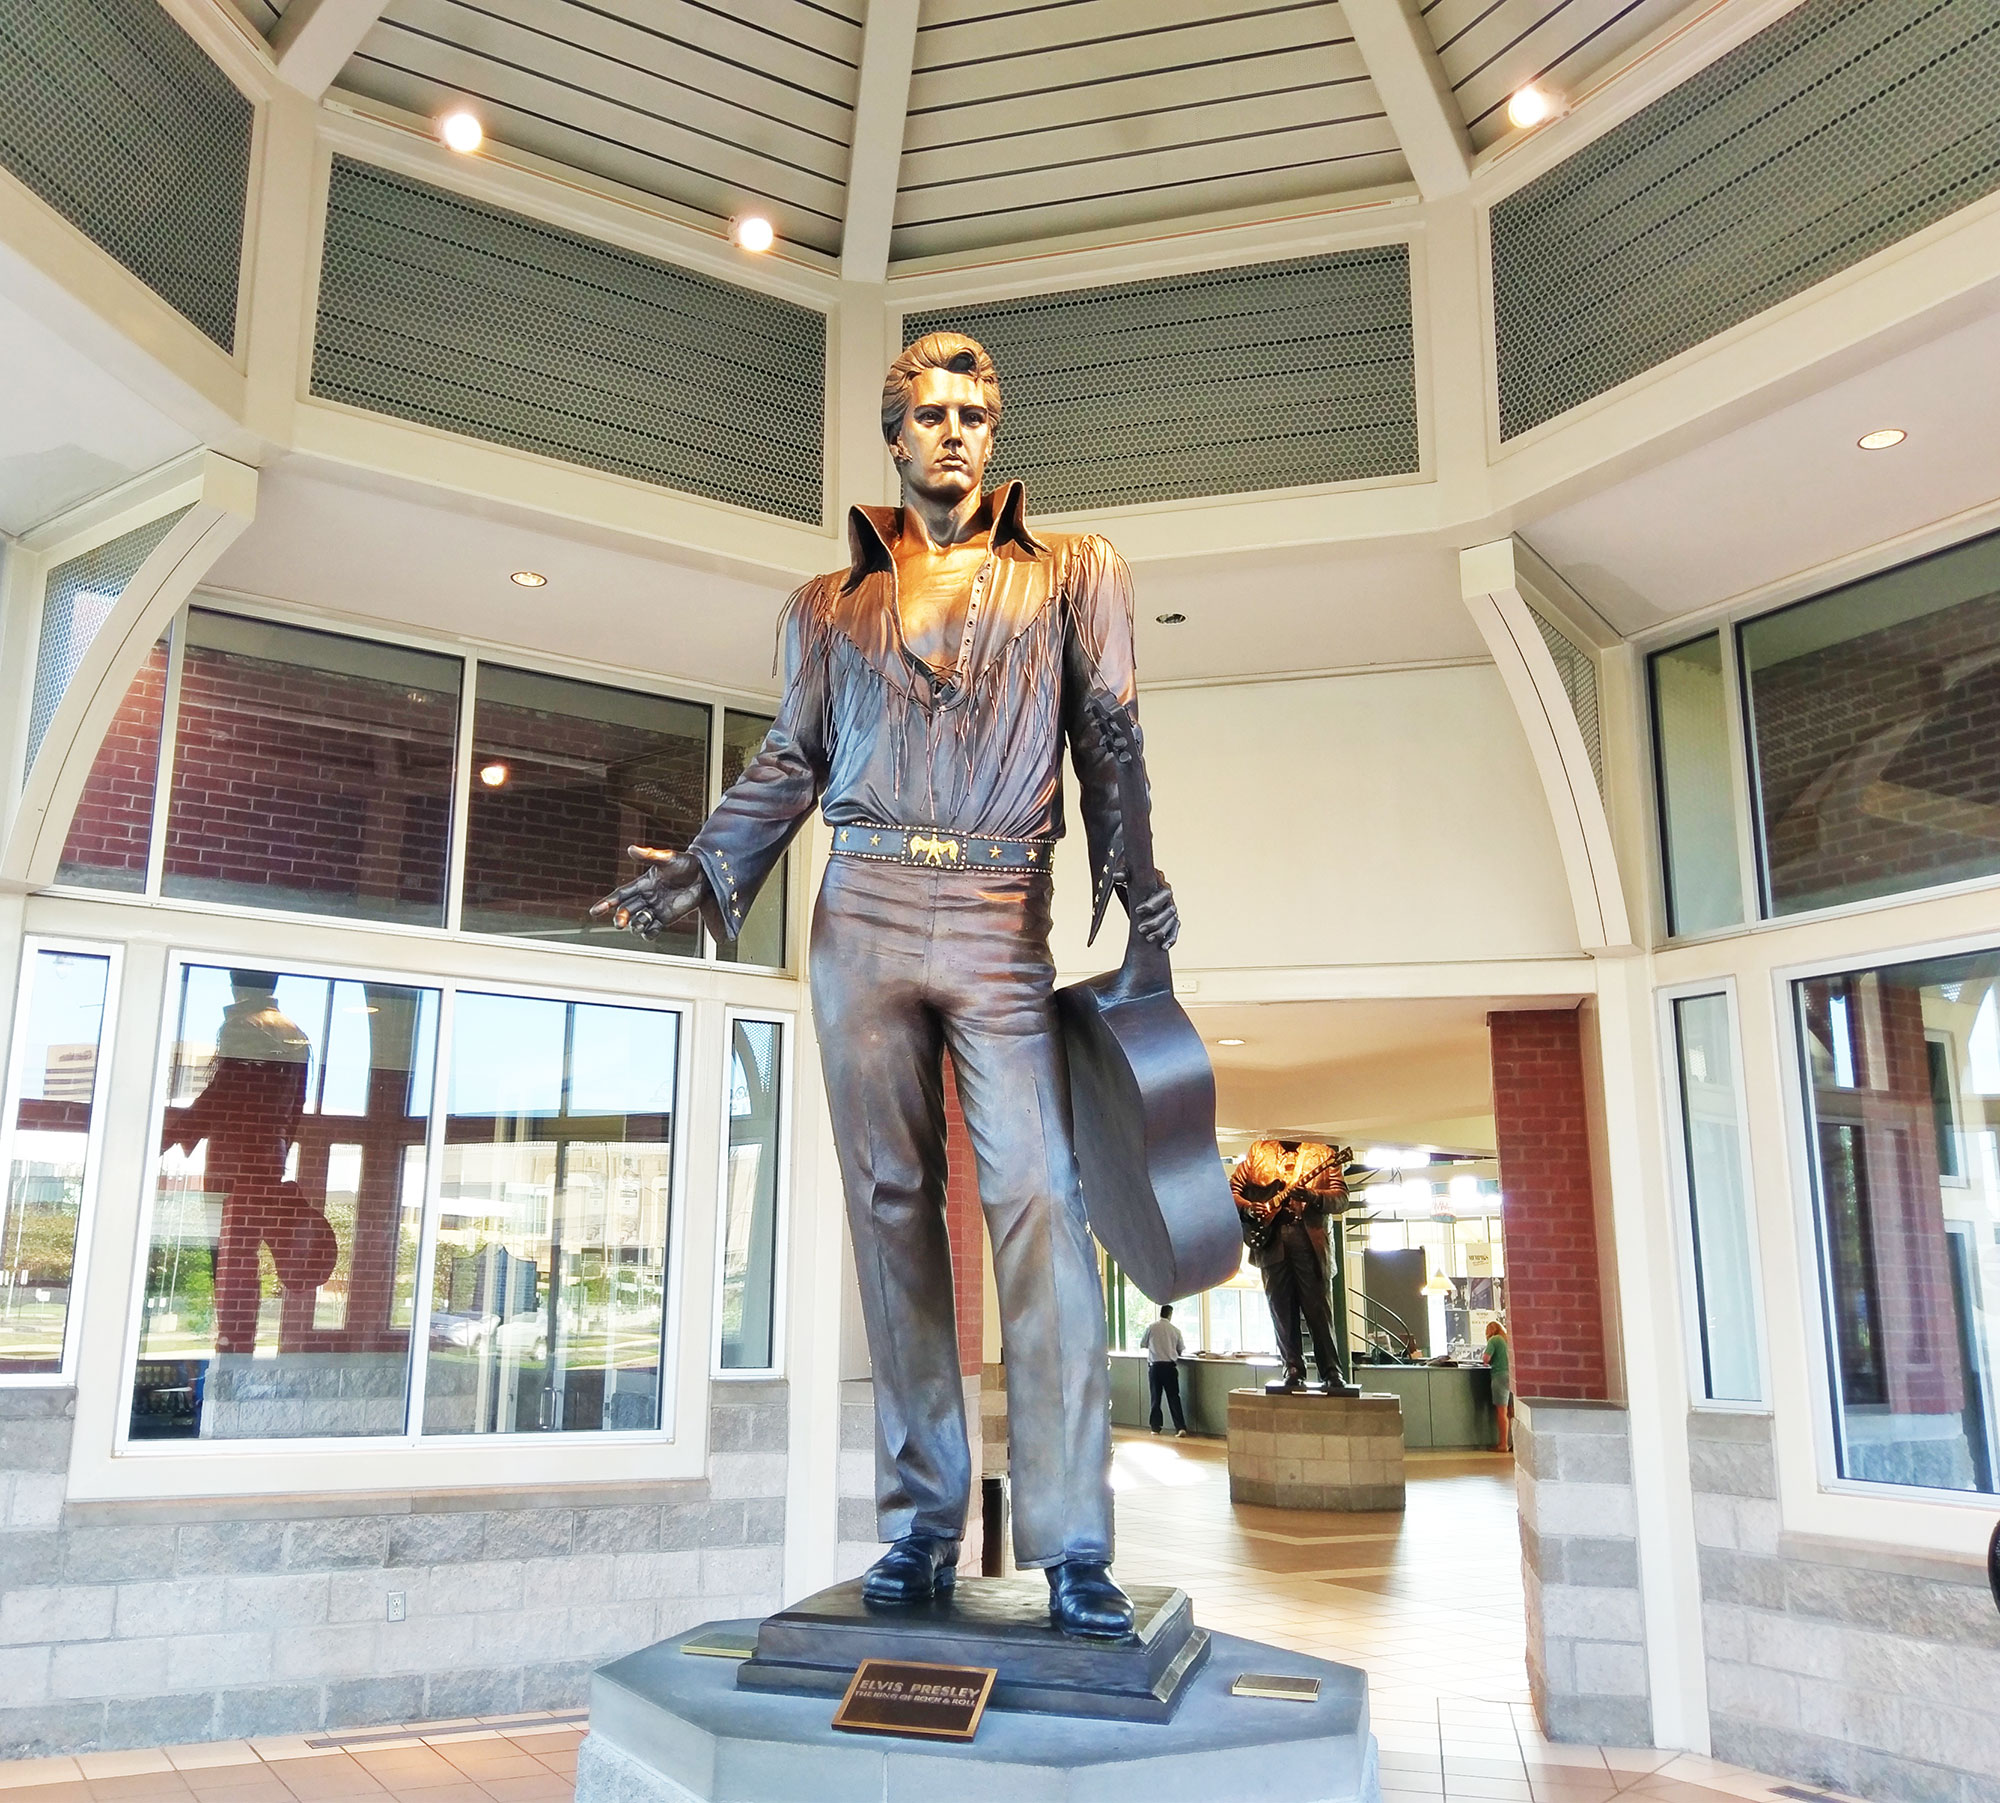 An Elvis Presley statue at the Memphis visitor's center.